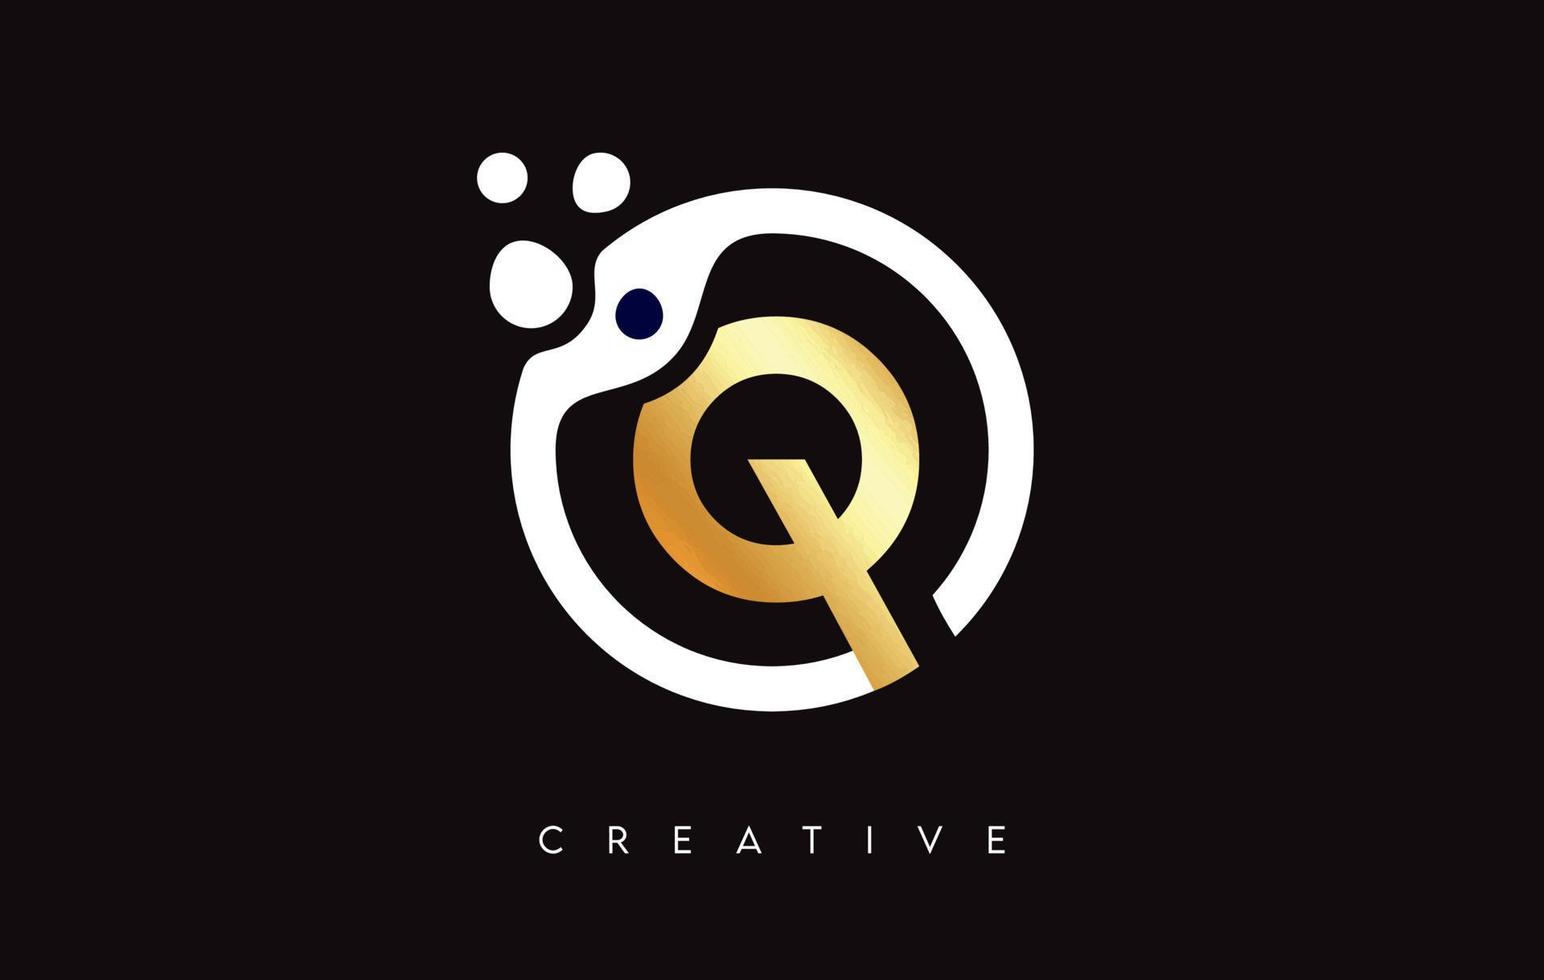 Golden Letter Q Logo with Dots and Bubbles inside a Circular Shape in Gold Colors Vector